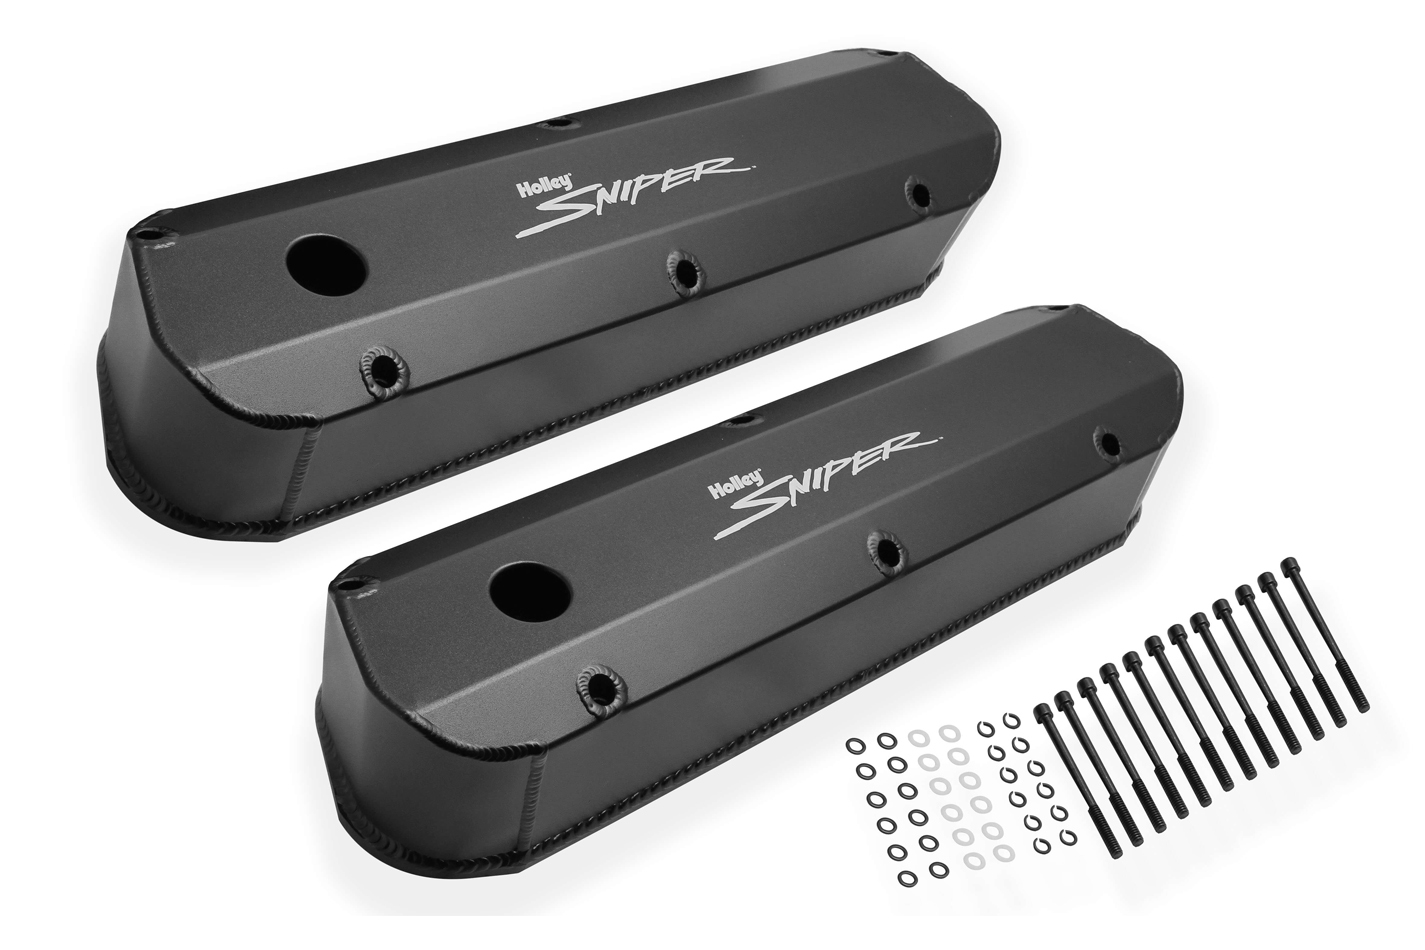 Holley 890012B Valve Cover, Sniper, Tall, Baffled, Breather Holes, Sniper Logo, Fabricated Aluminum, Black, Small Block Ford, Pair